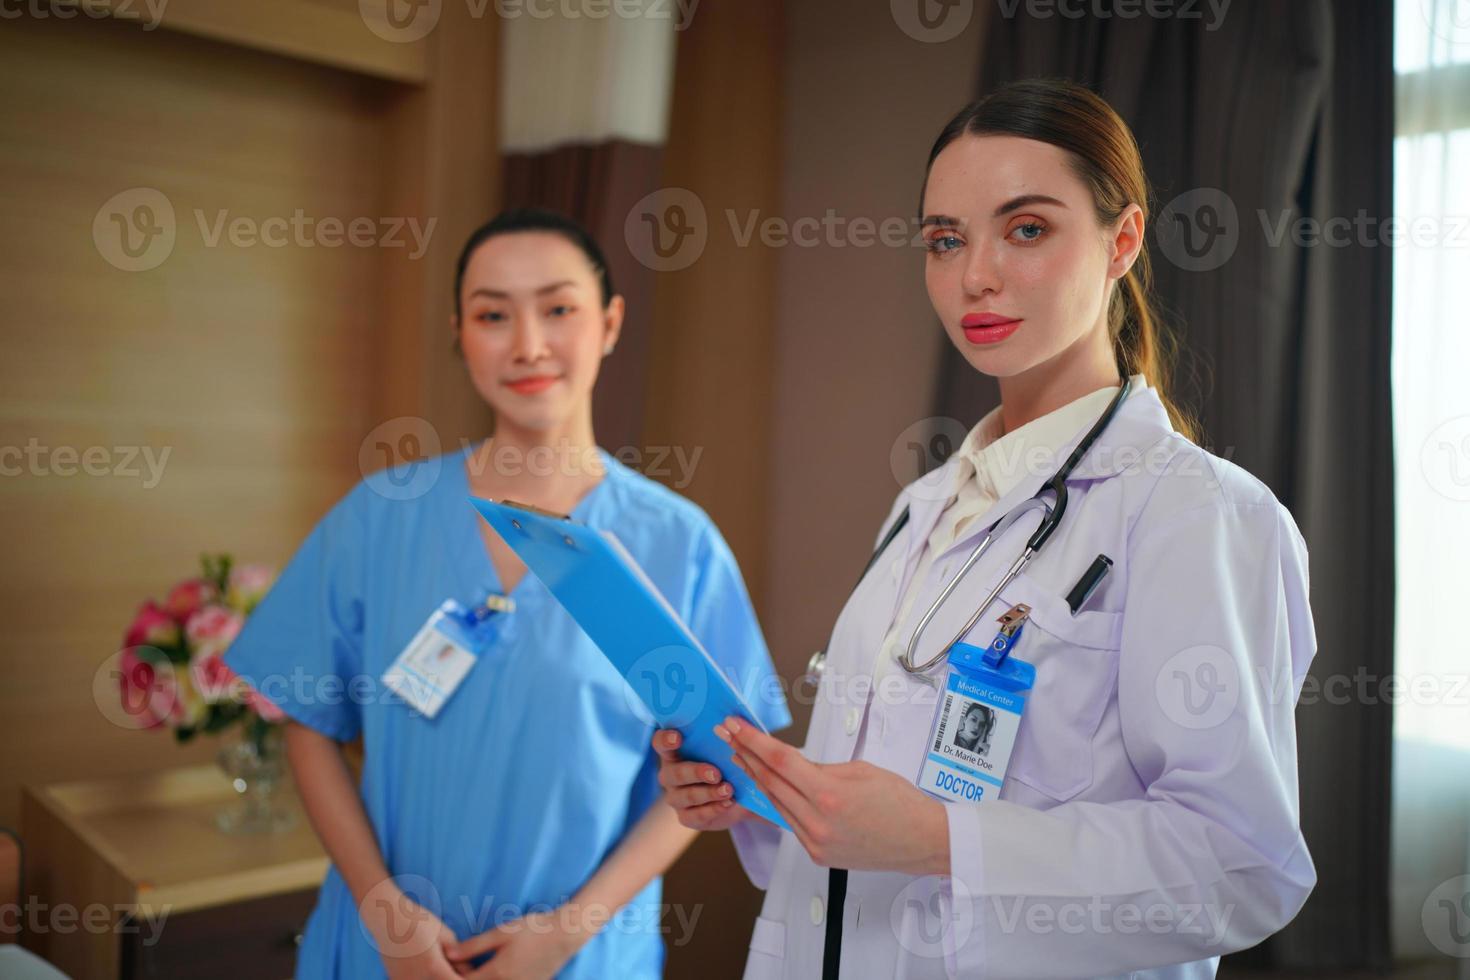 Nurse and doctor team ready for work day photo